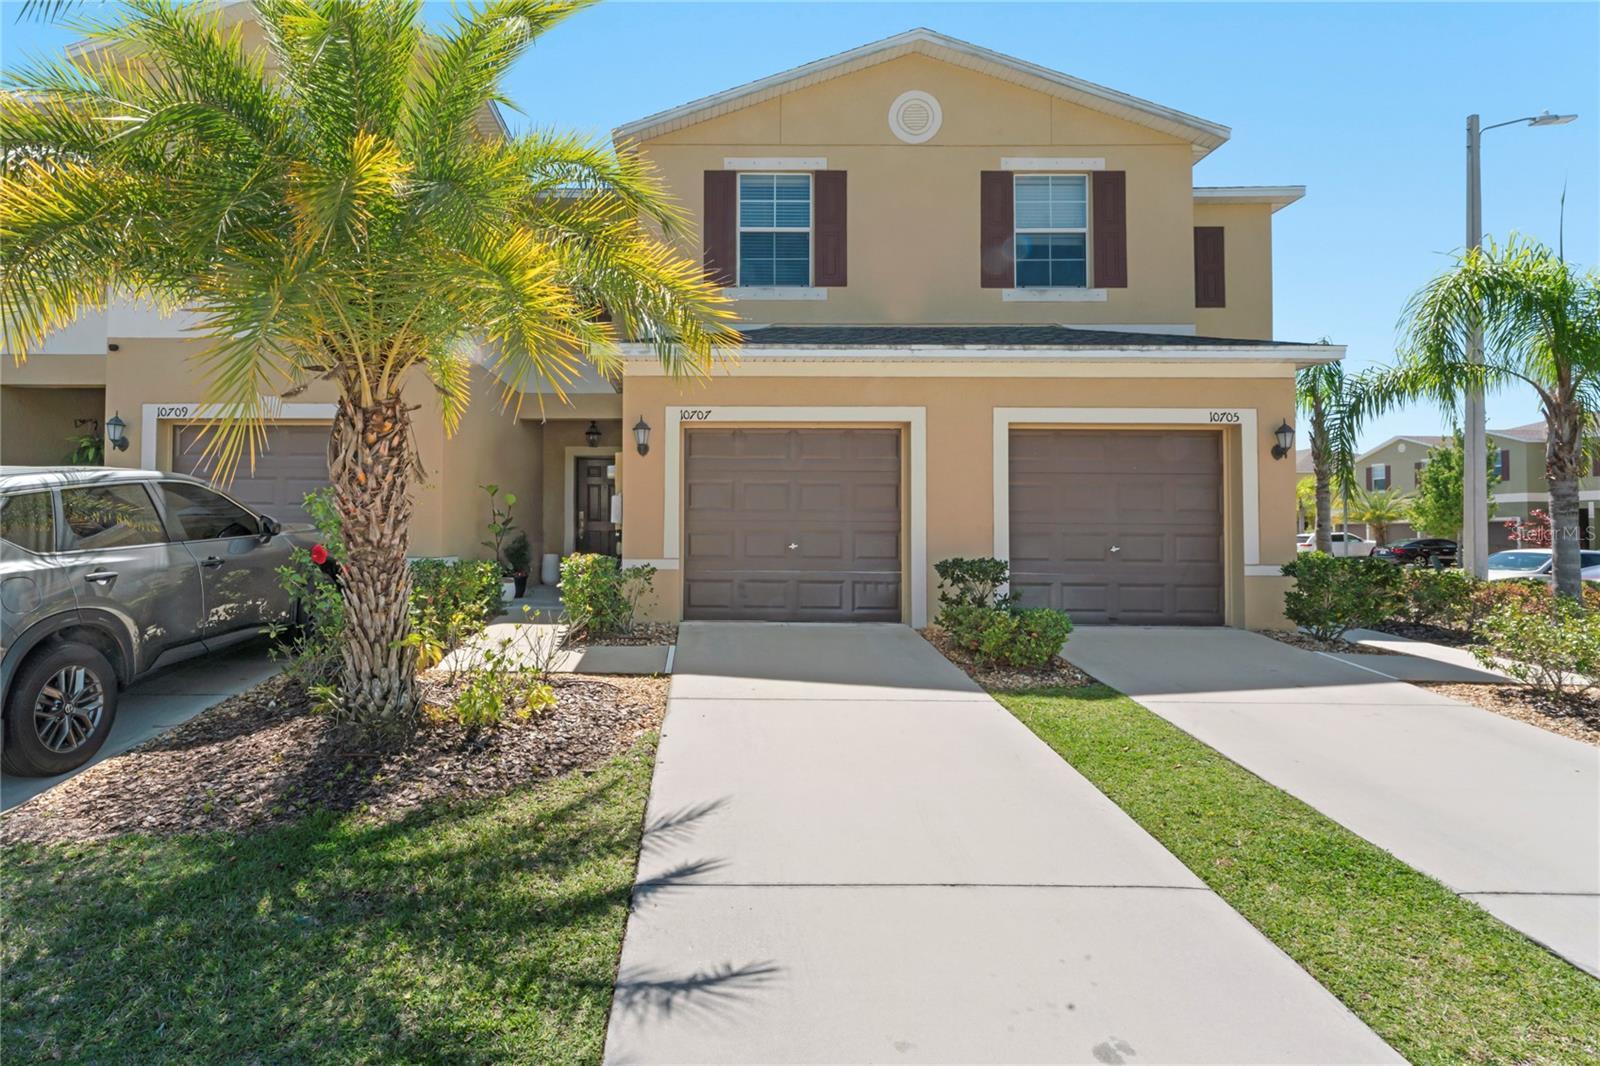 Photo one of 10707 Moonlight Mile Way Riverview FL 33579 | MLS T3513798